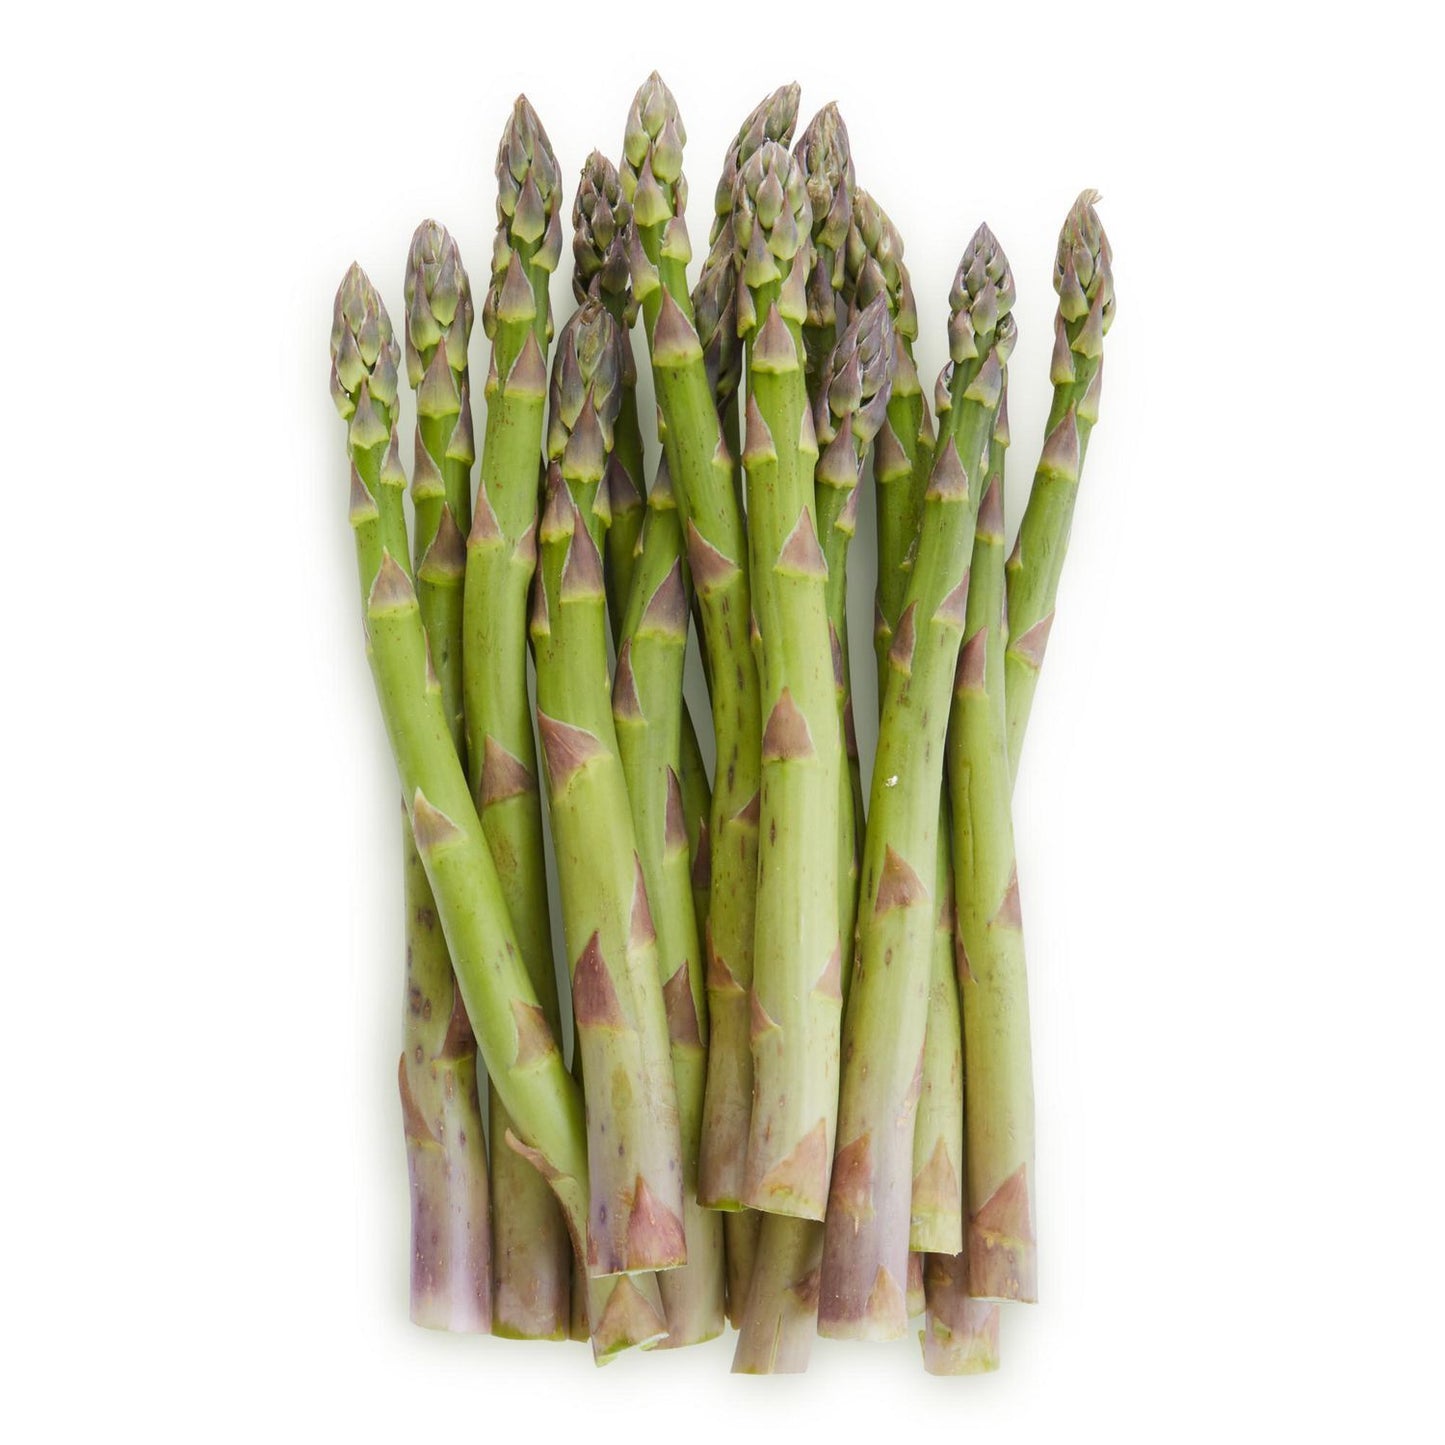 Asparagus - Jersey Knight